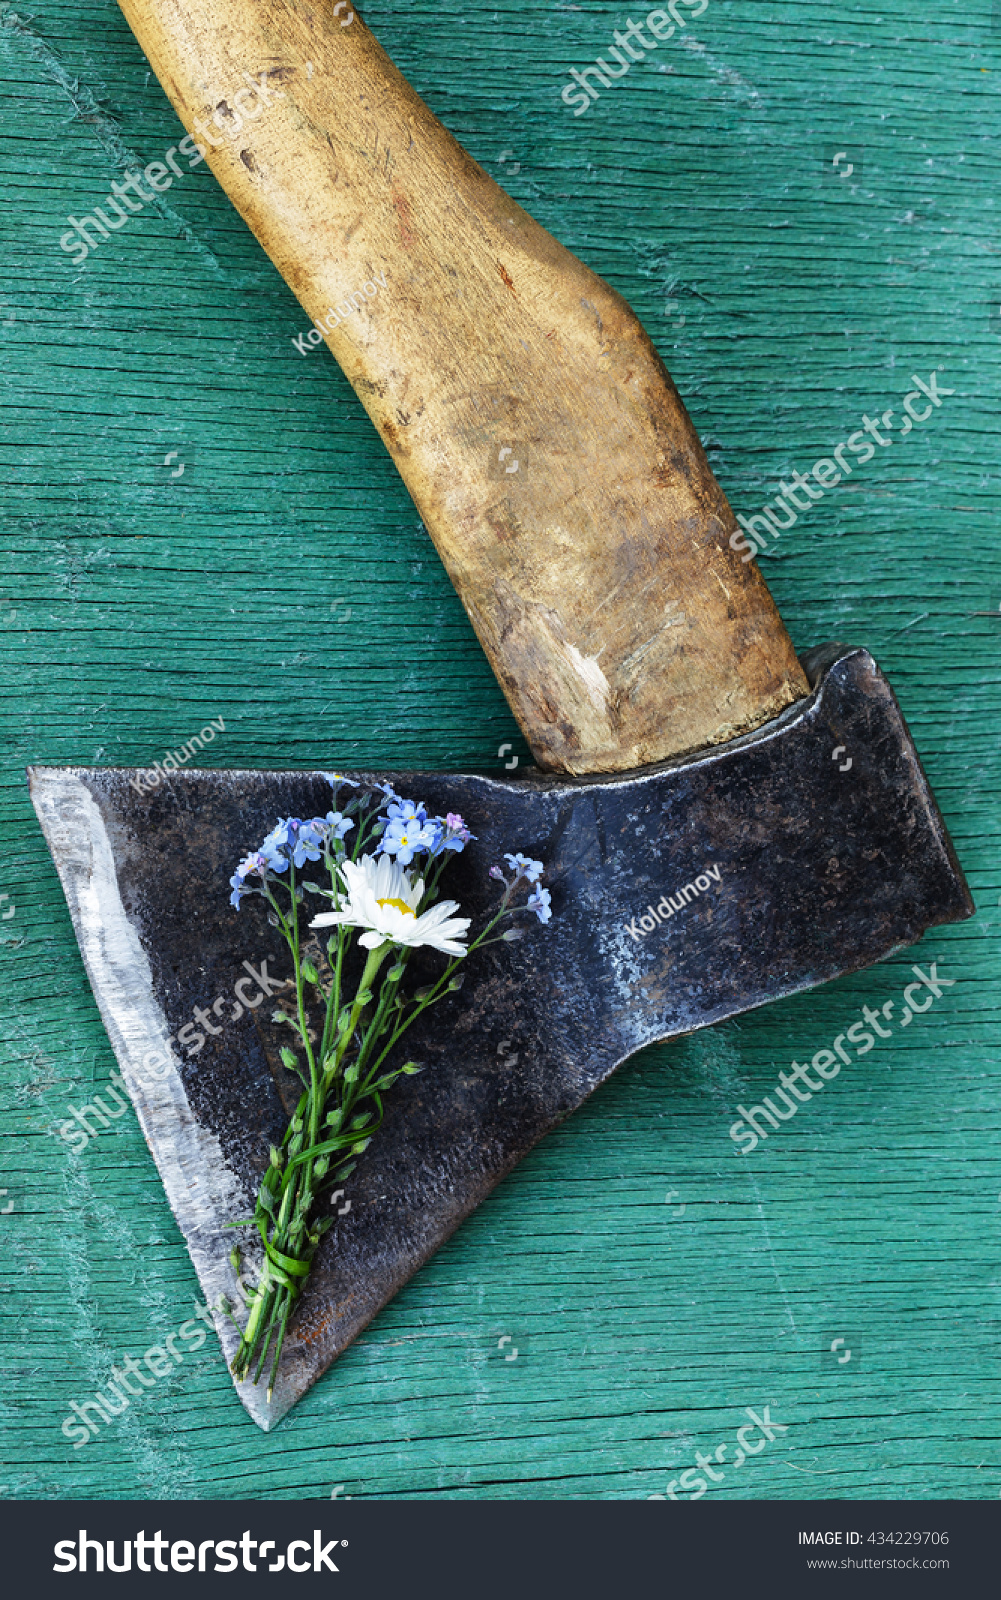 Beautiful bouquet of flowers covering the old rough ax. Bury the hatchet. #434229706